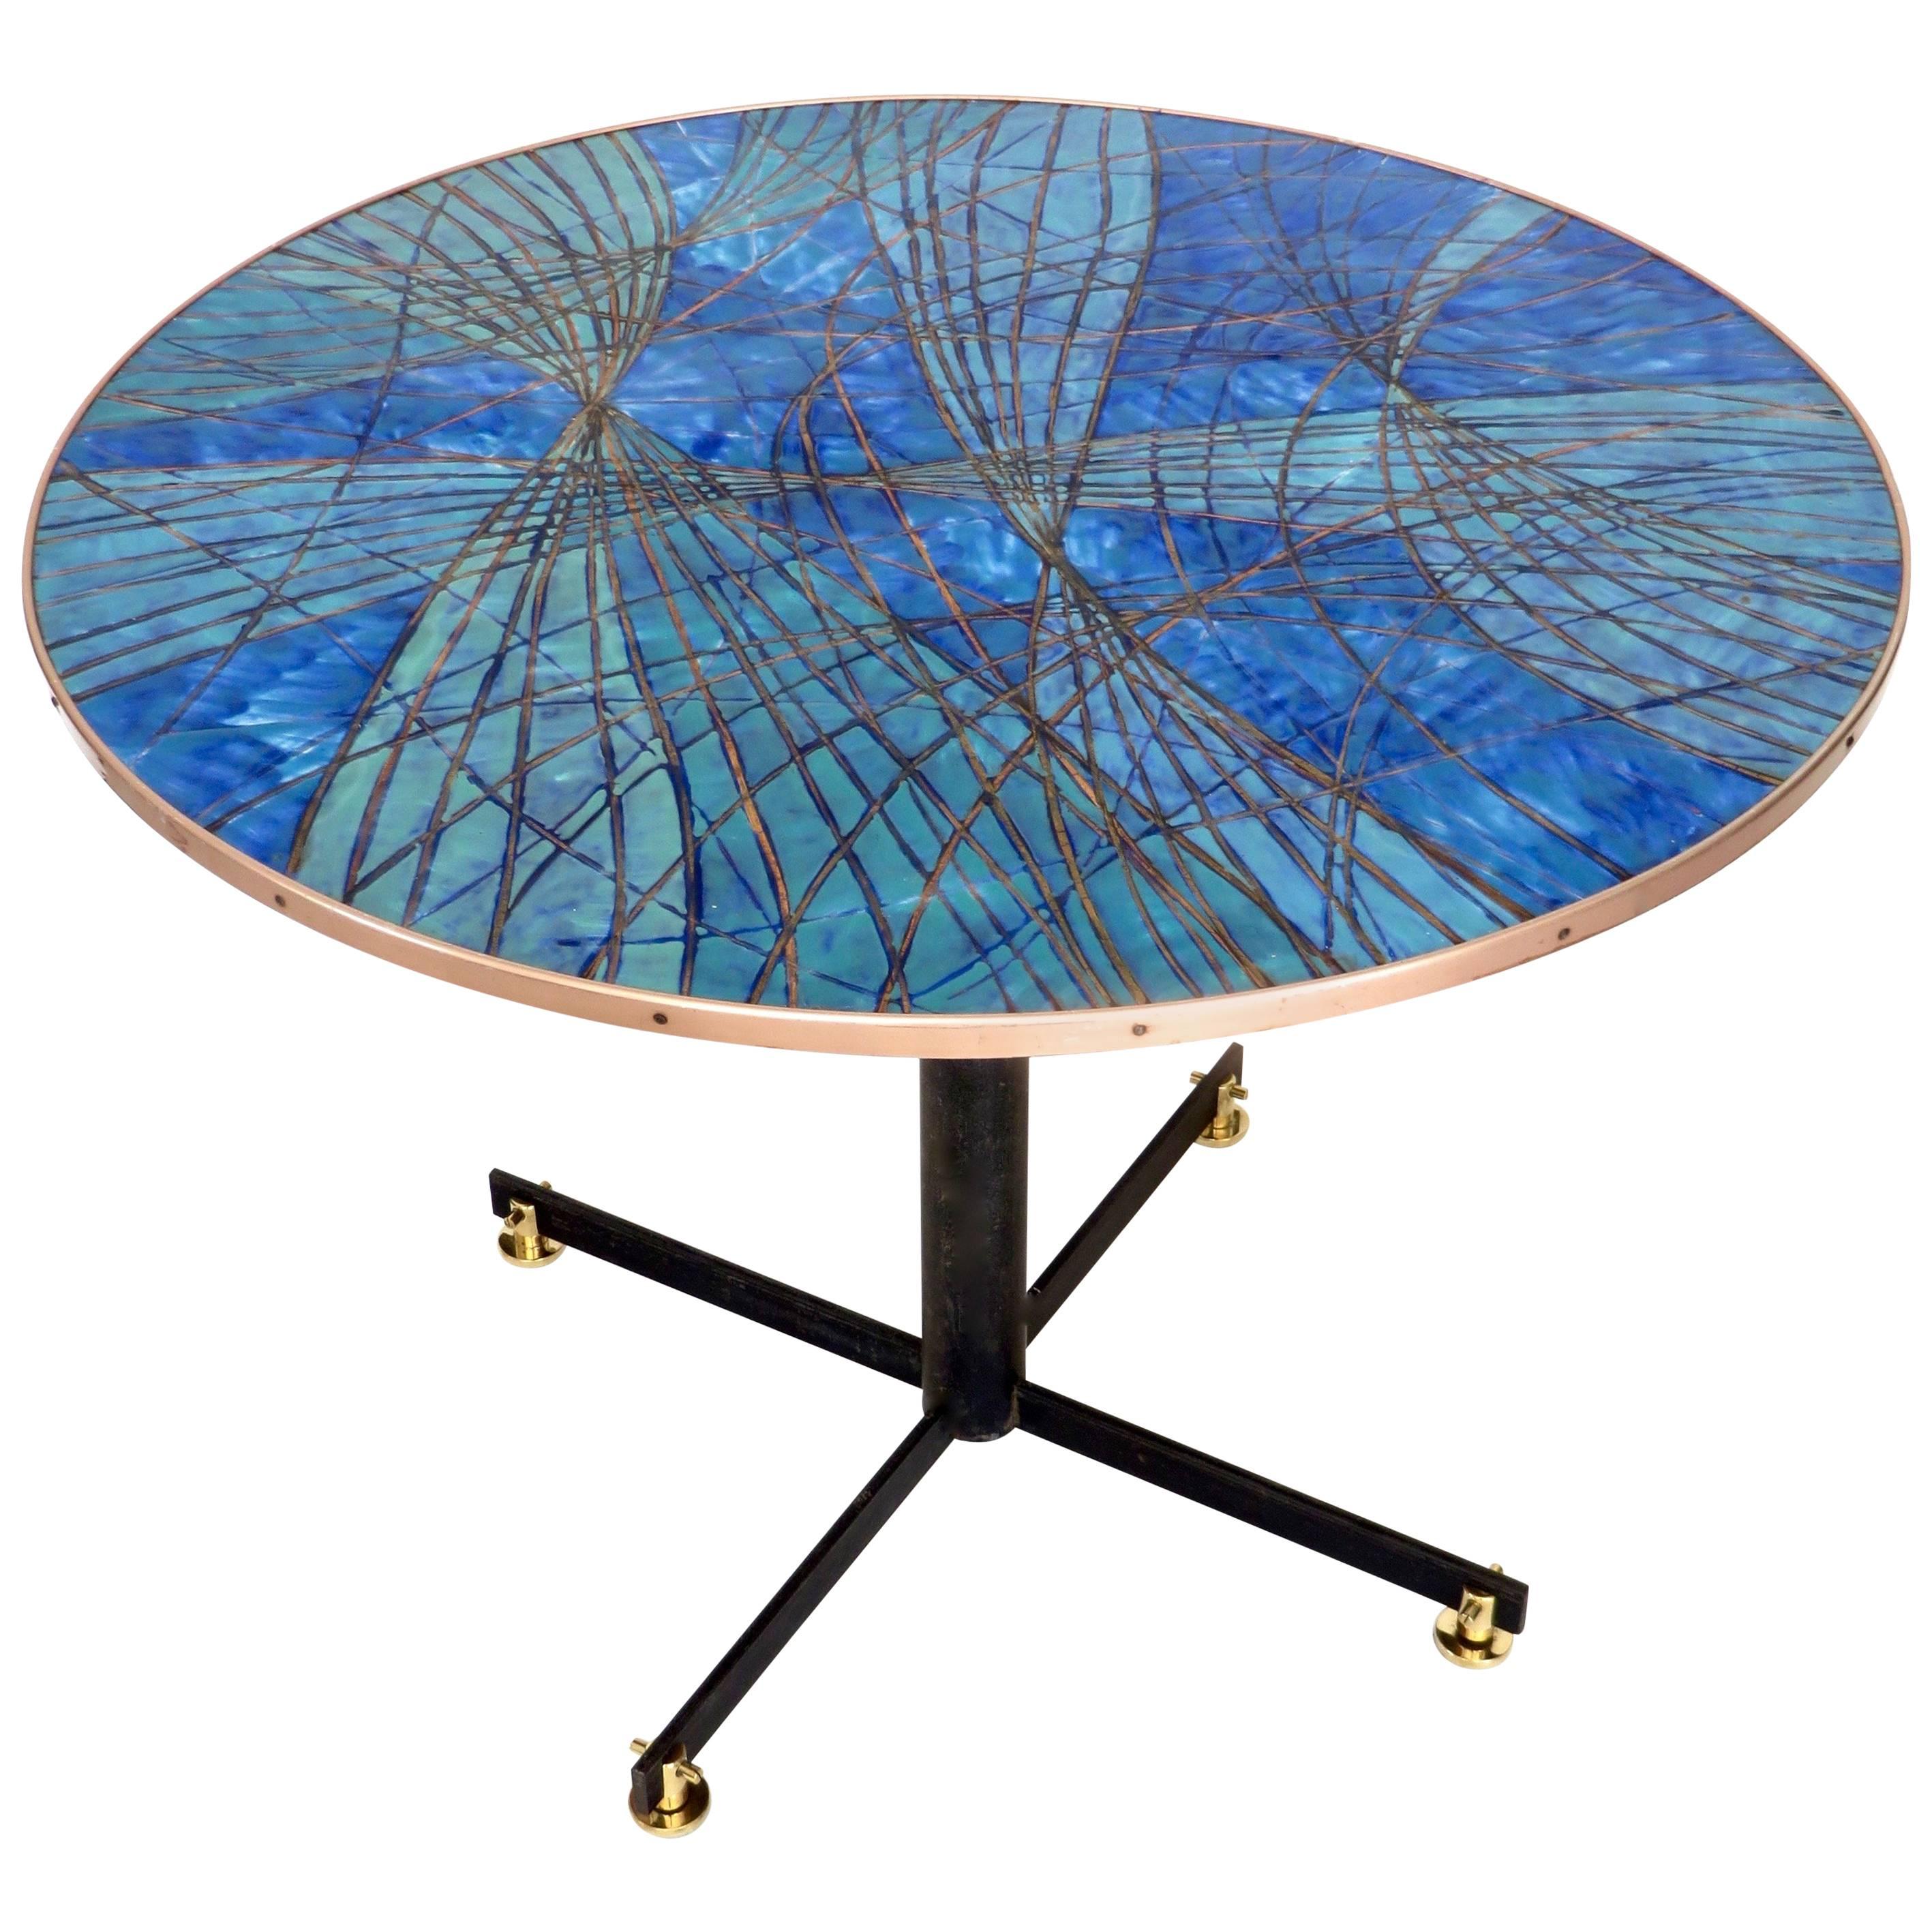 Italian Blue and Gold on Copper Enamel Center or Dining Table Architectural Legs